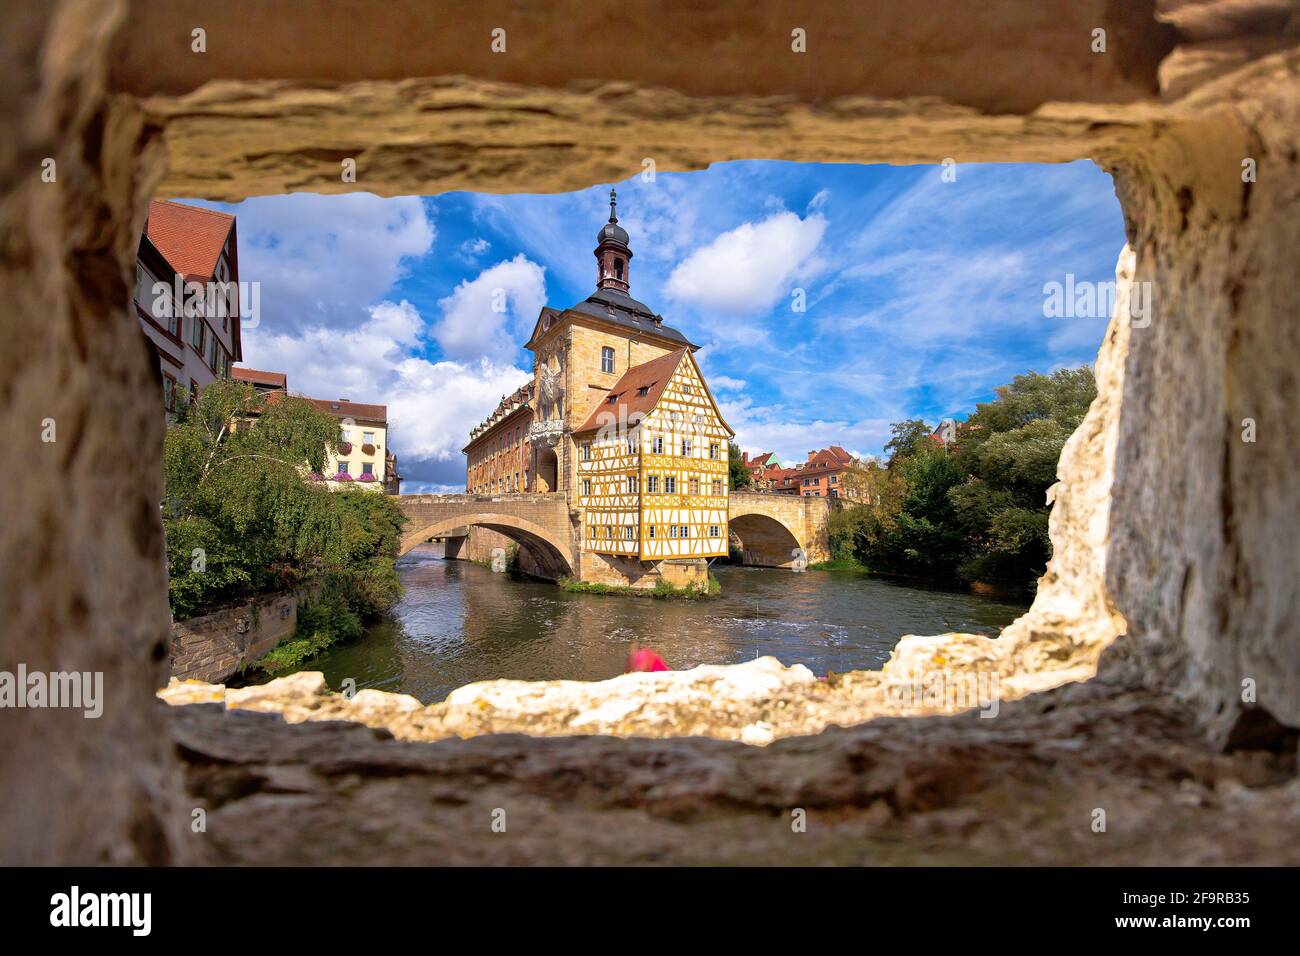 Bamberg. Scenic view of Old Town Hall of Bamberg (Altes Rathaus) with two bridges over the Regnitz river view through stone window, Bavaria region of Stock Photo